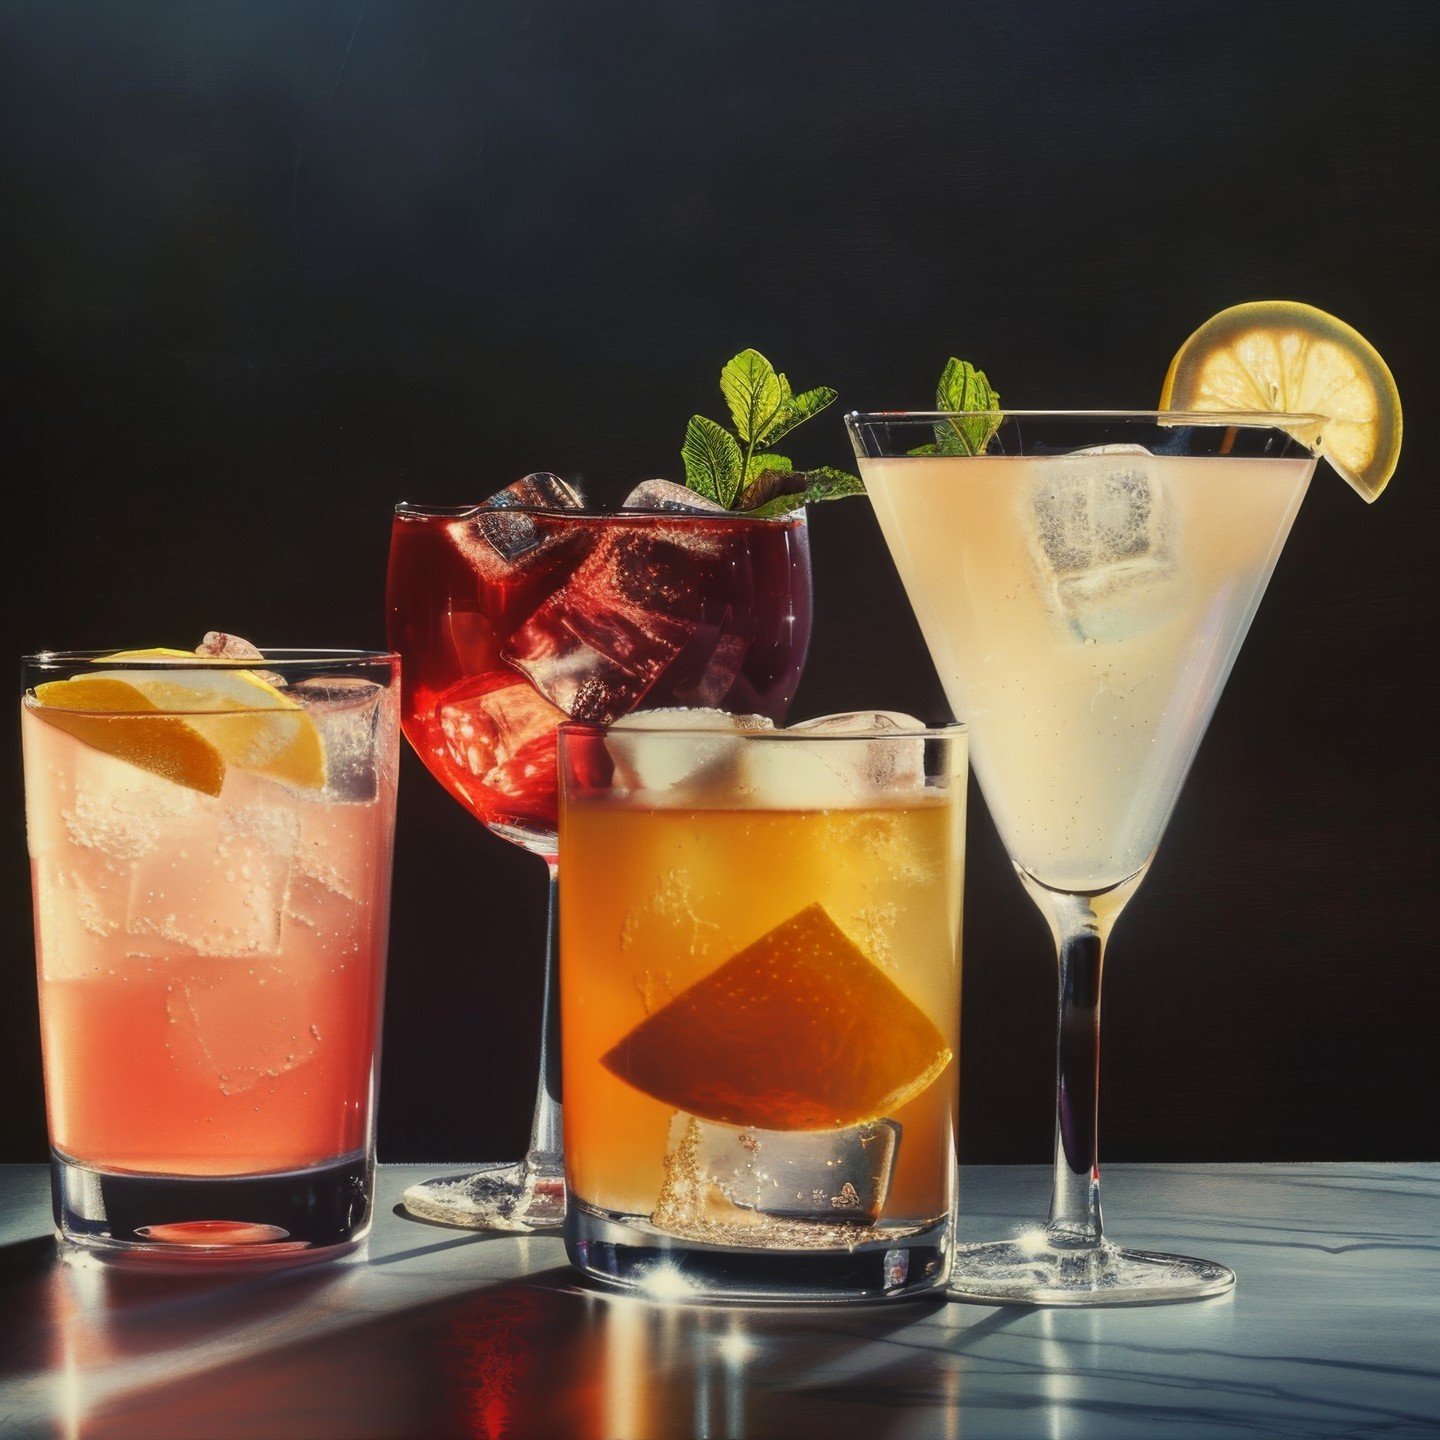 Glassware Selection: Different types of glassware can affect the presentation and perception of cocktails. Understanding how glass shape and size influence aroma release and temperature retention can help in selecting the most suitable glassware for 